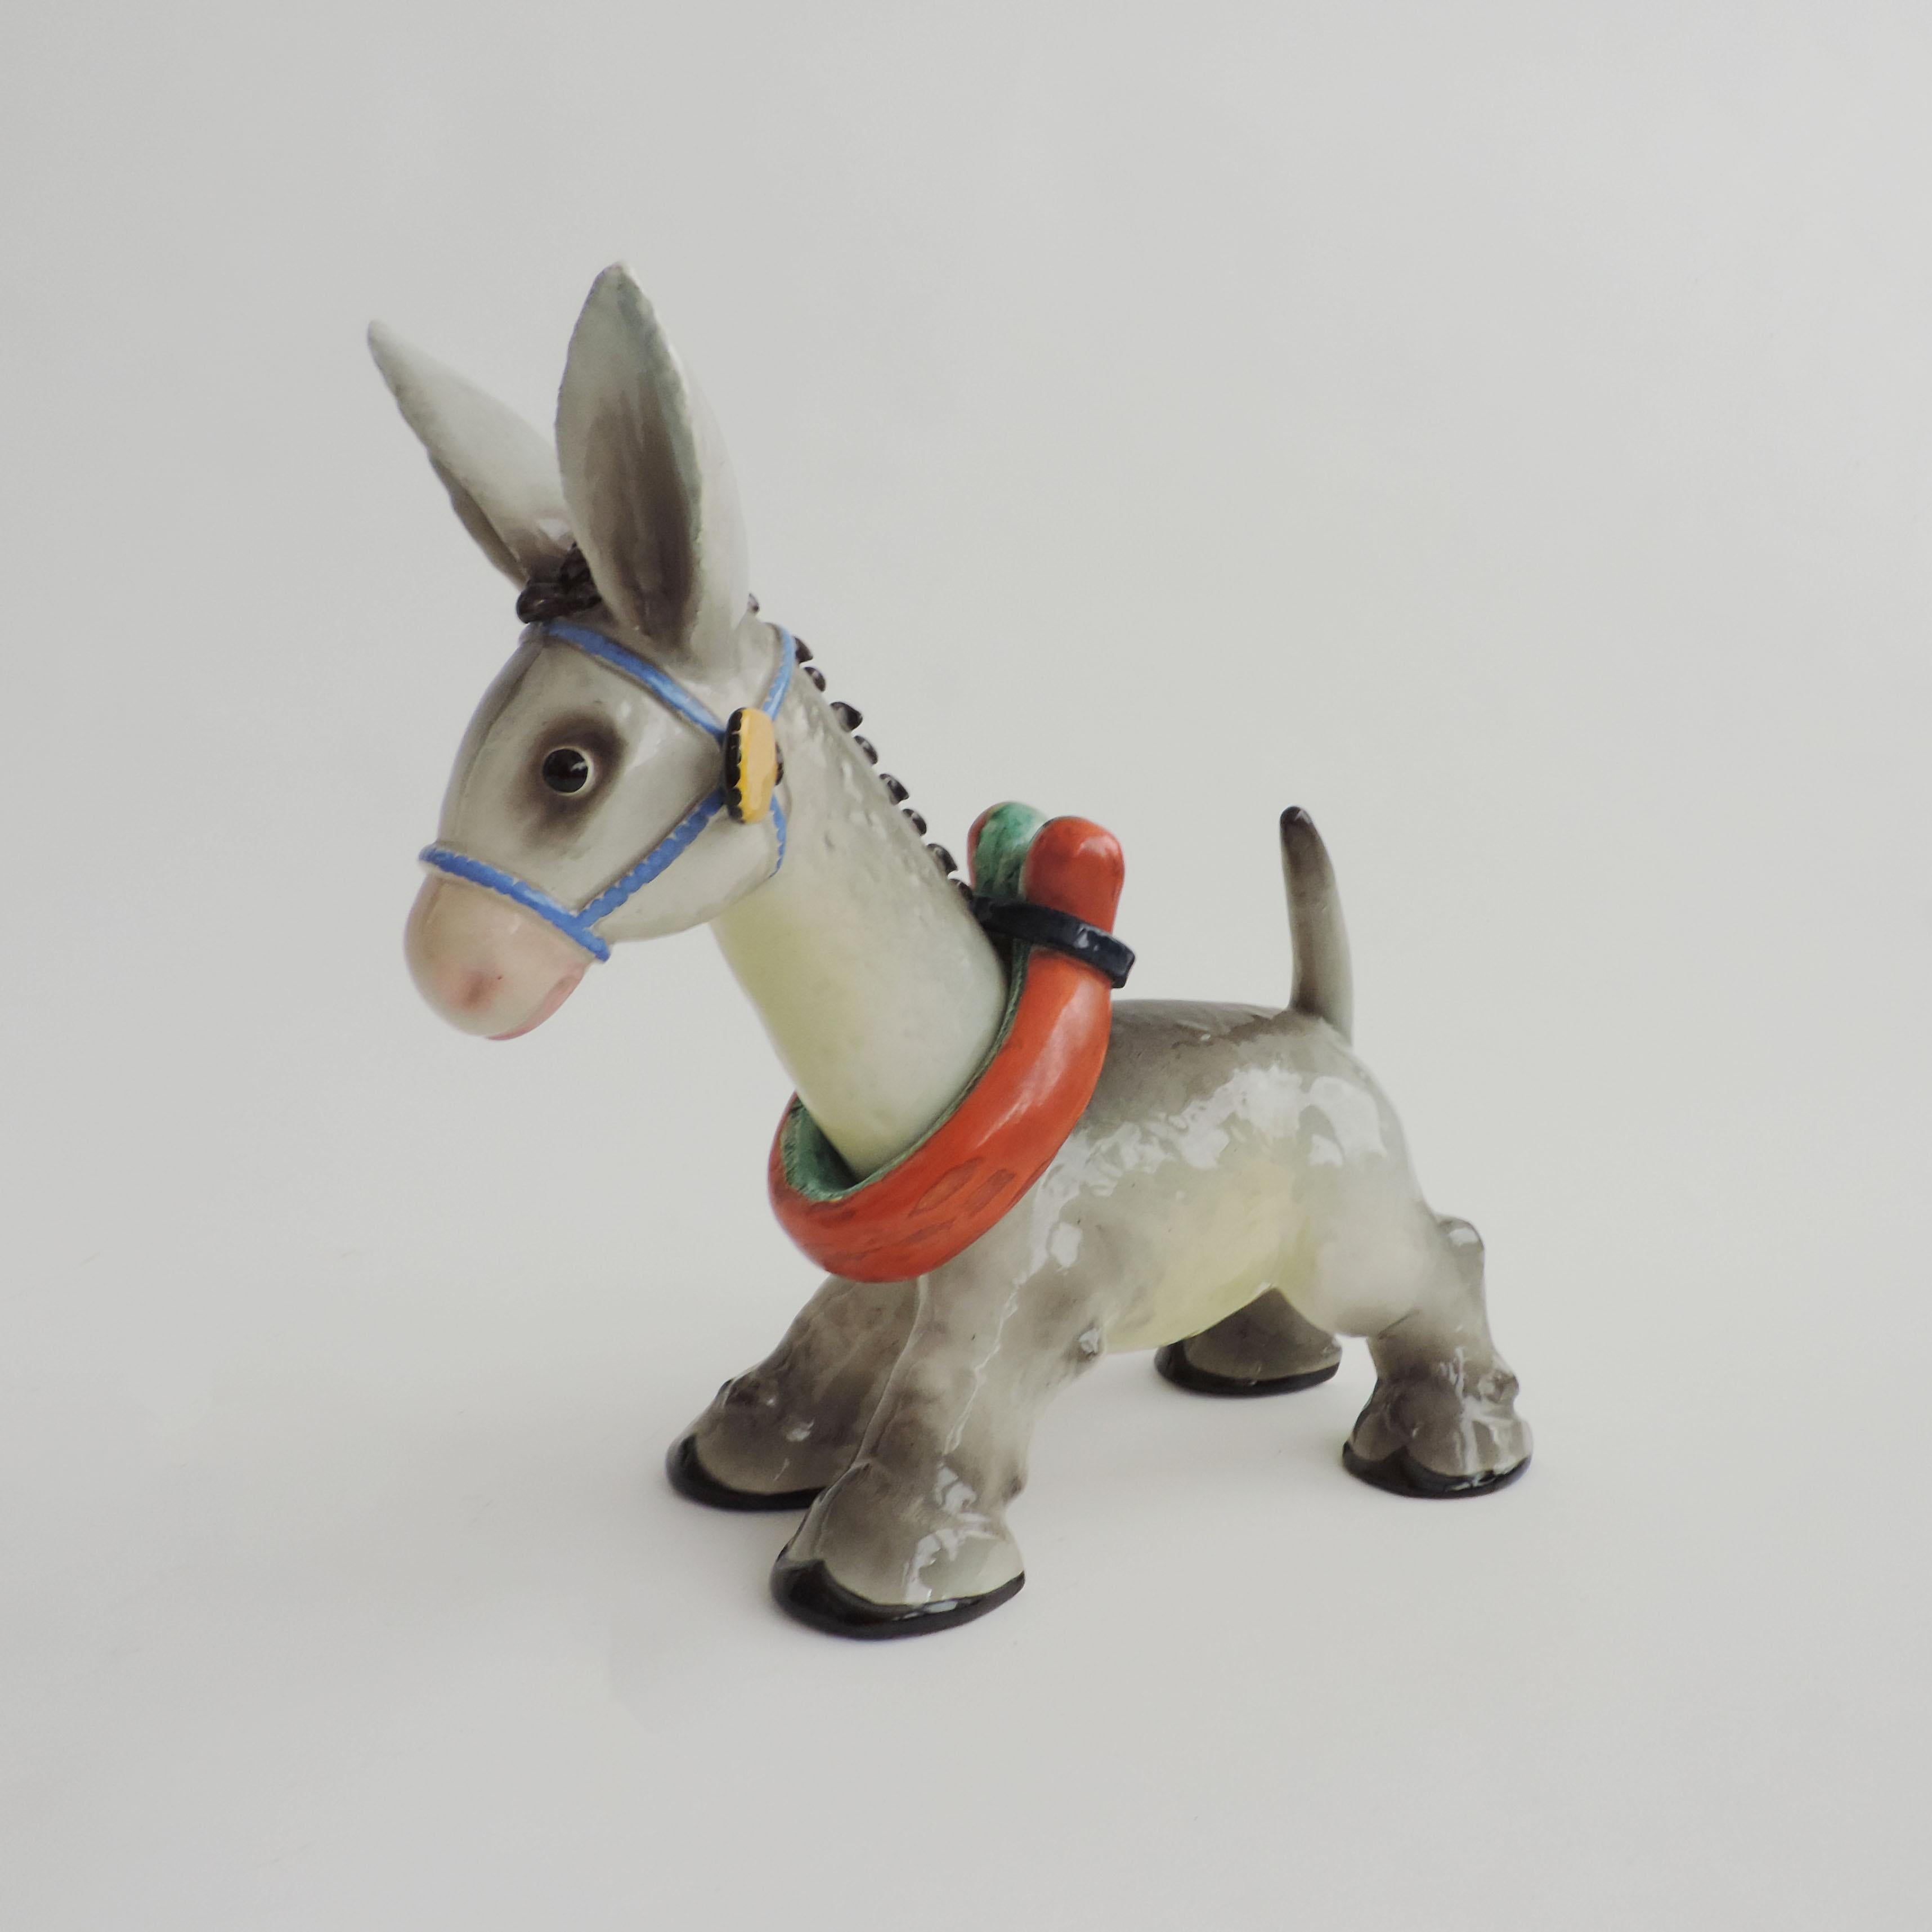 A Splendid and friendly Donkey by Tarcisio Tosin for the 